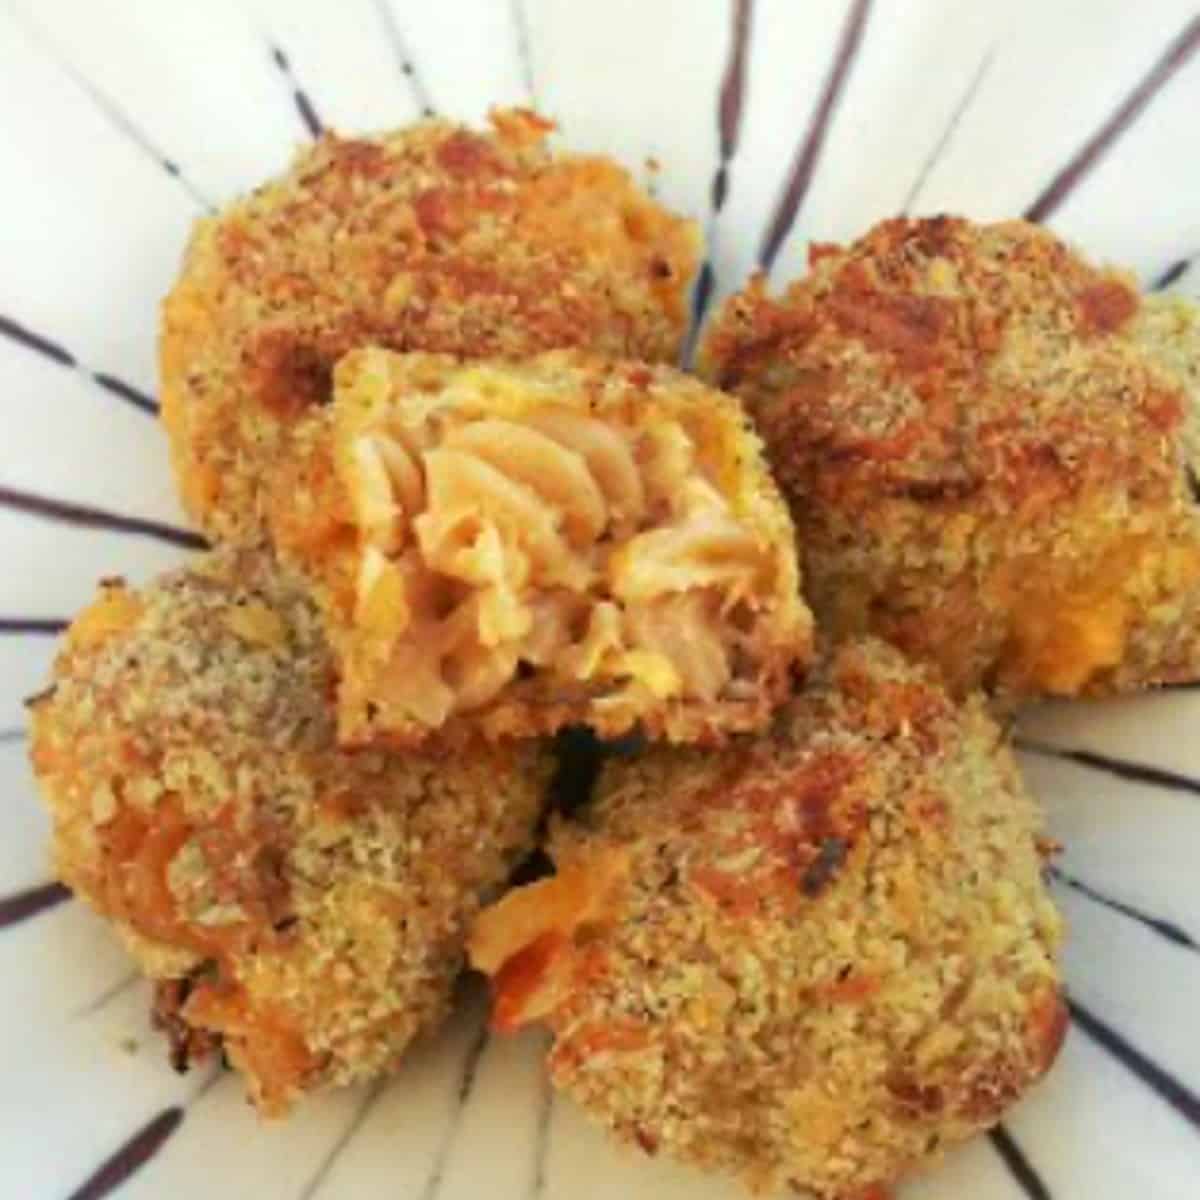 A plate of baked macaroni and cheese balls on a table. The macaroni and cheese balls are golden brown and crispy on the outside, and cheesy and gooey on the inside. The macaroni and cheese balls are served with a side of marinara sauce for dipping.